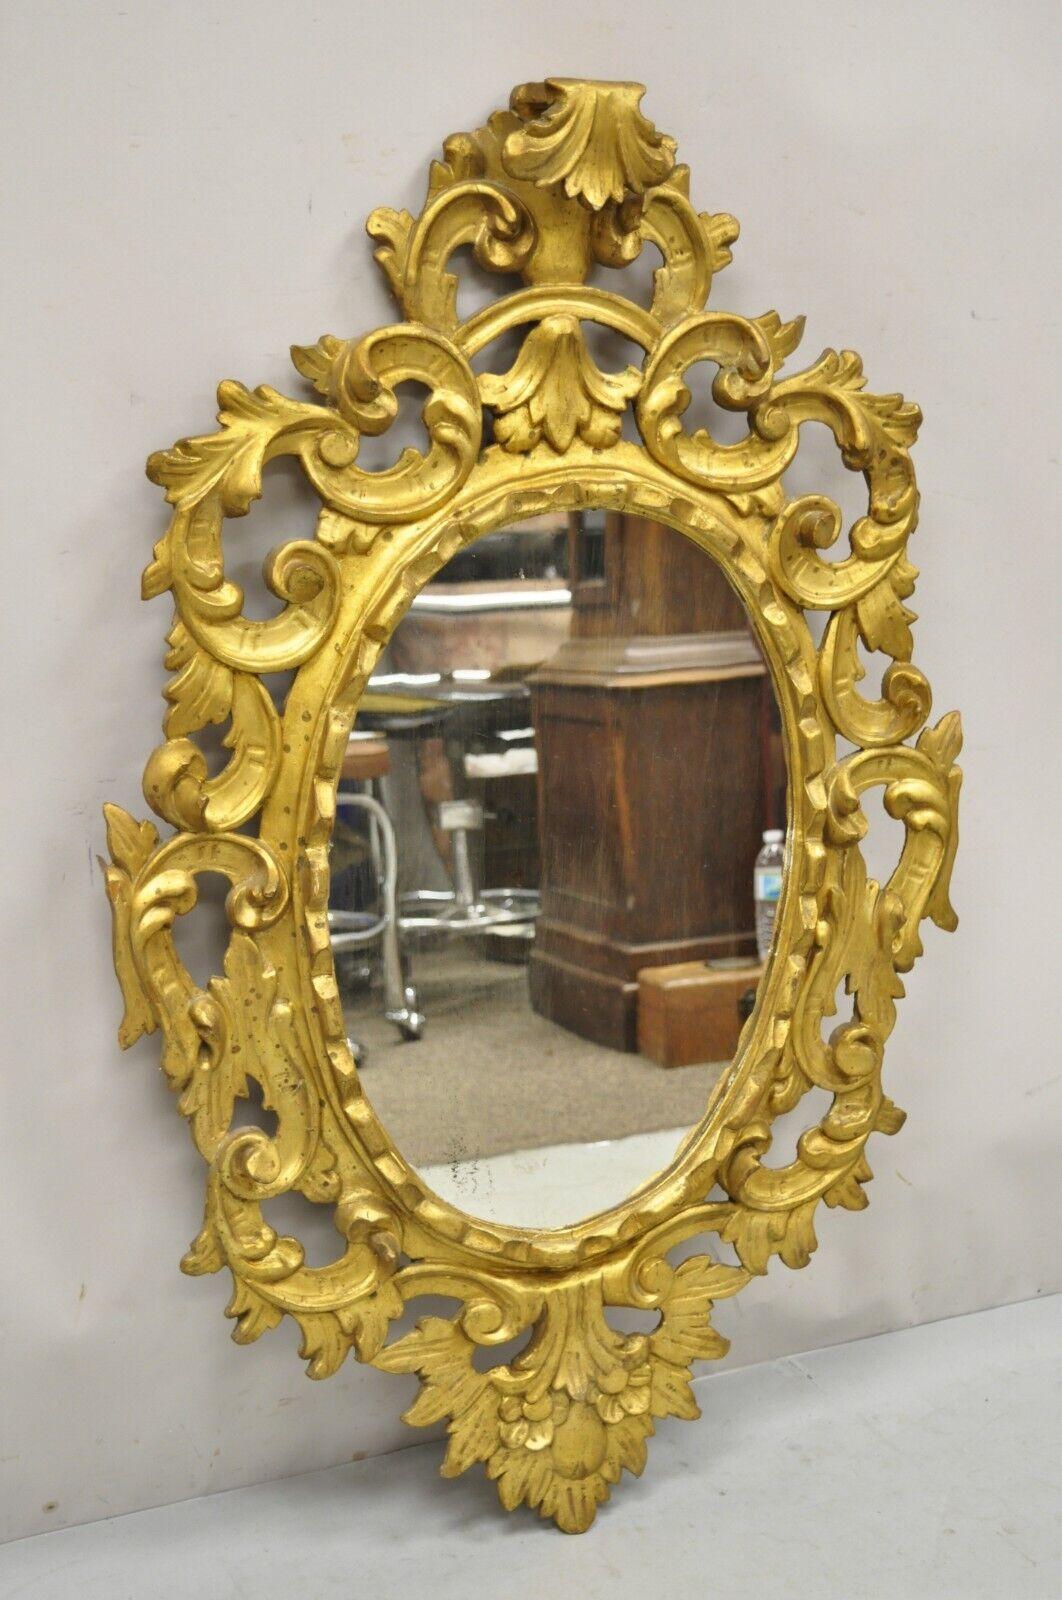 Vintage Italian Carved Wood Gold Gilt French Rococo Style wall mirror. Item features gold gilt finish, ornate carvings throughout, solid wood frame, distressed finish, very nice vintage item, great style and form. Circa Mid 20th Century.